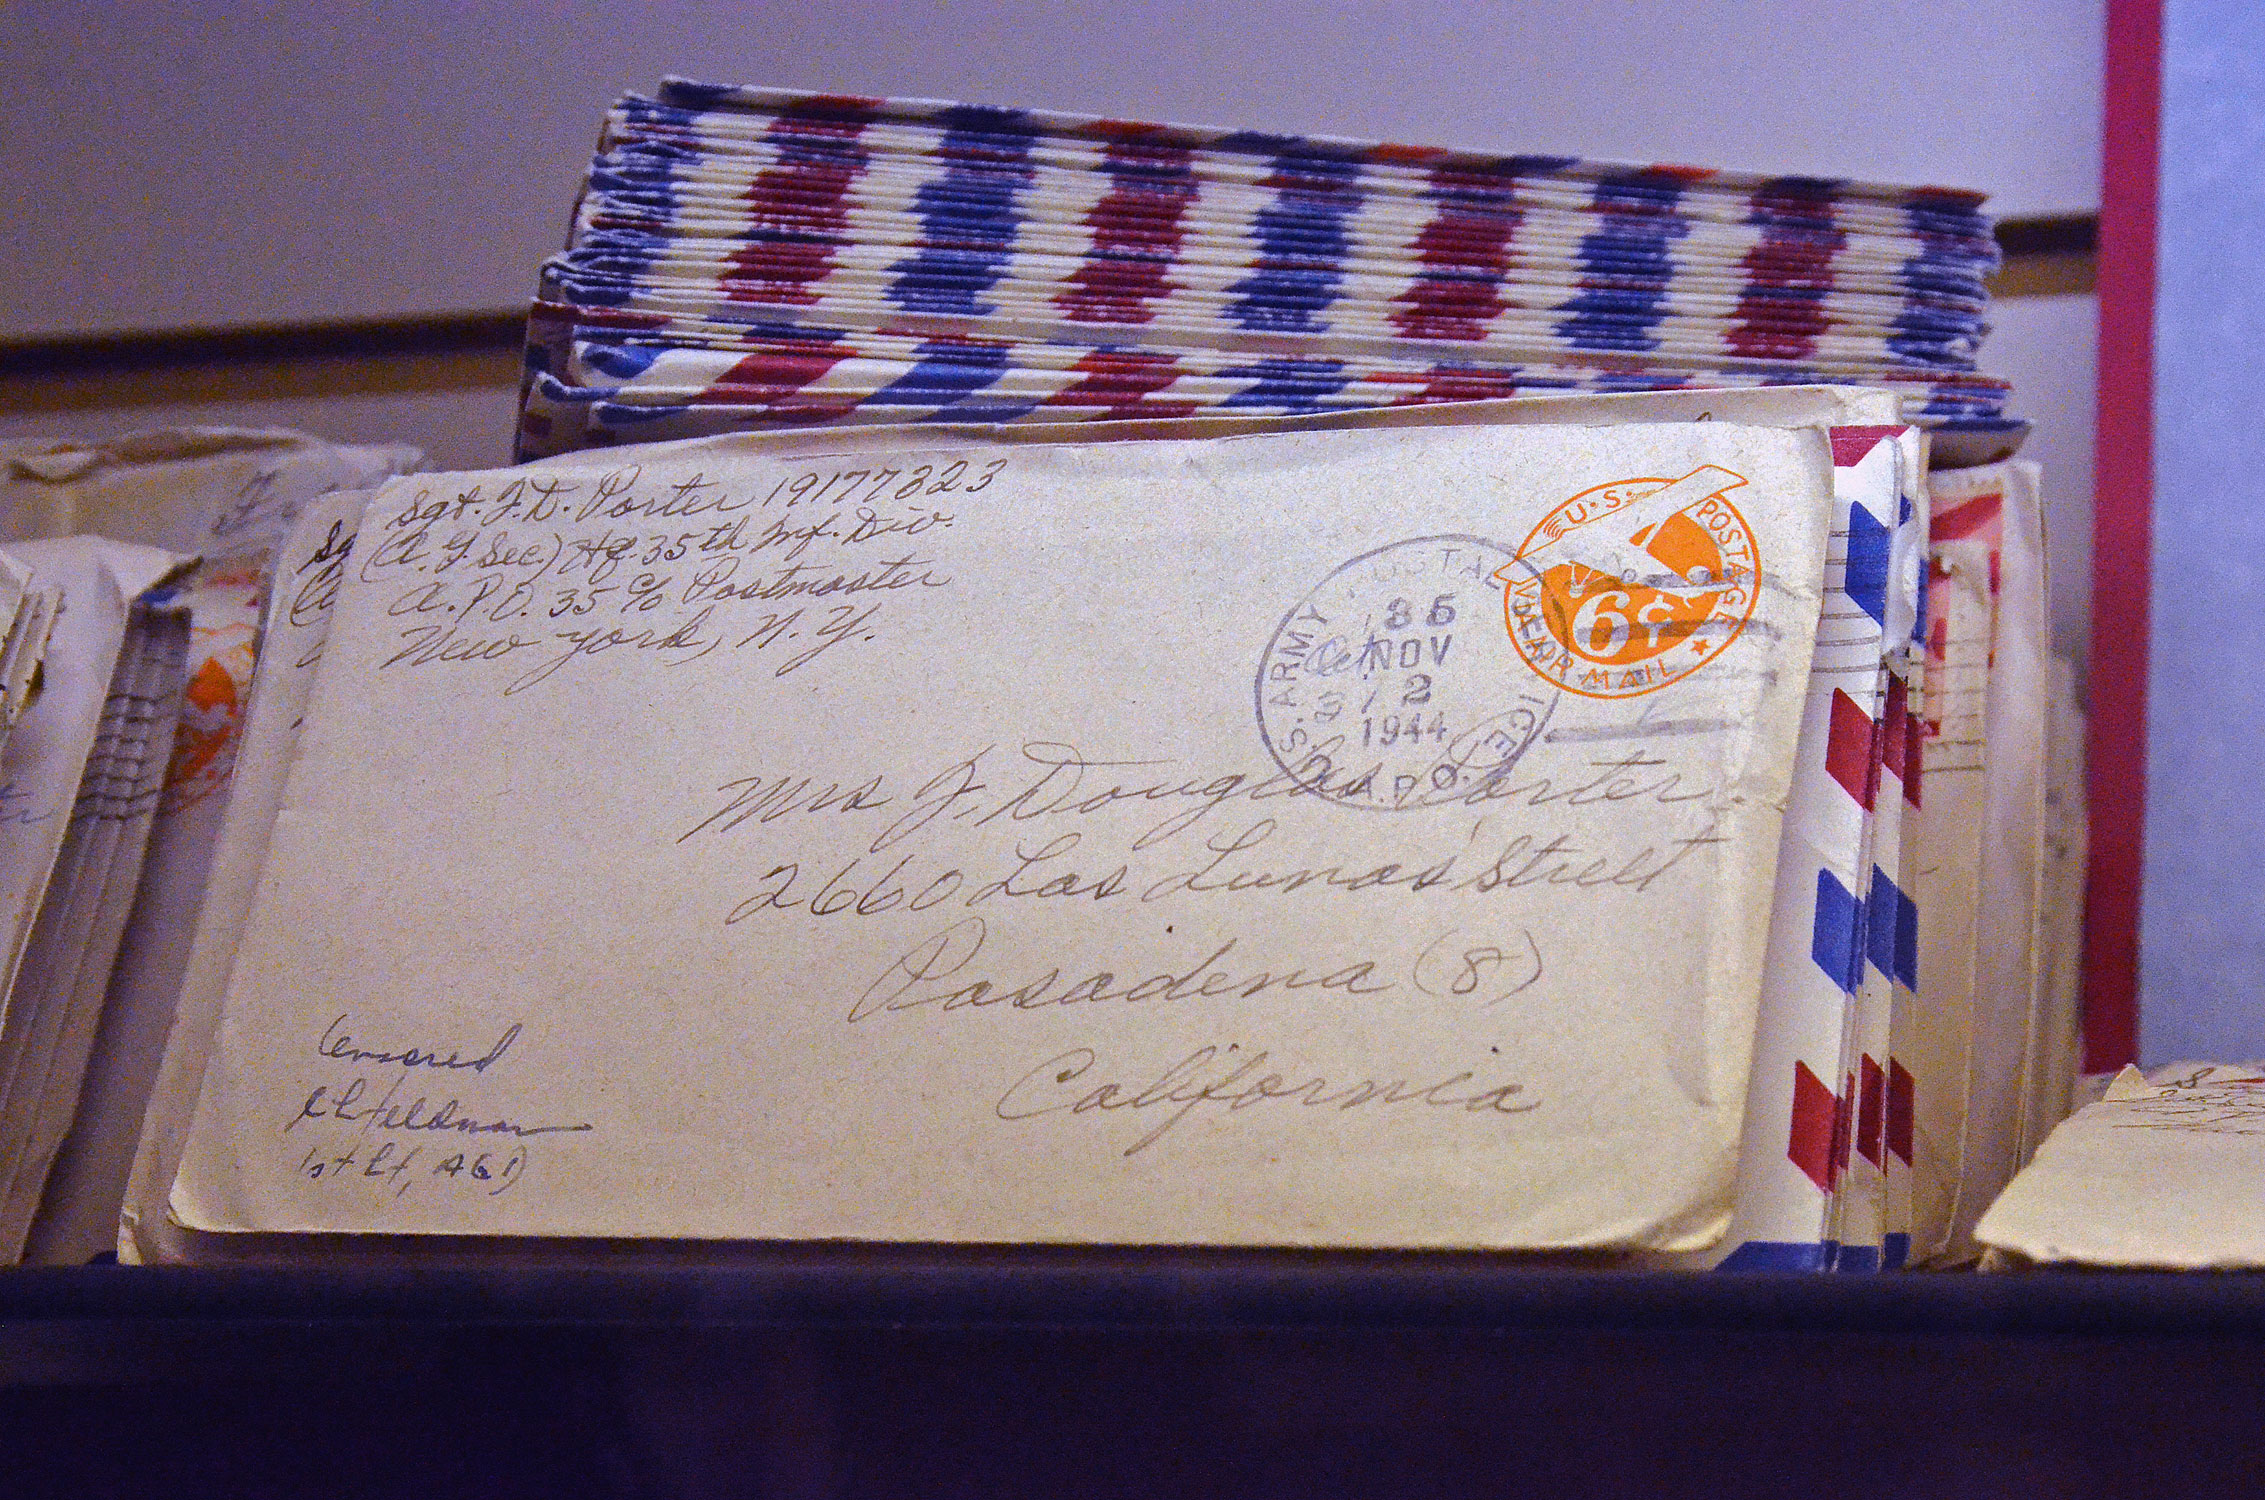 An exhibit at the 35th Infantry Division Museum in Topeka, Kan., displays letters from the front that Sgt. John Douglas Porter wrote to his wife during World War II. Porter, of Headquarters Company, 35th Infantry Division, wrote more than 500 letters to his wife, Helen. The “Love Letters from the Front” were donated to the museum by Porter’s family. (Photos by Jonathan (Jay) Koester / NCO Journal)